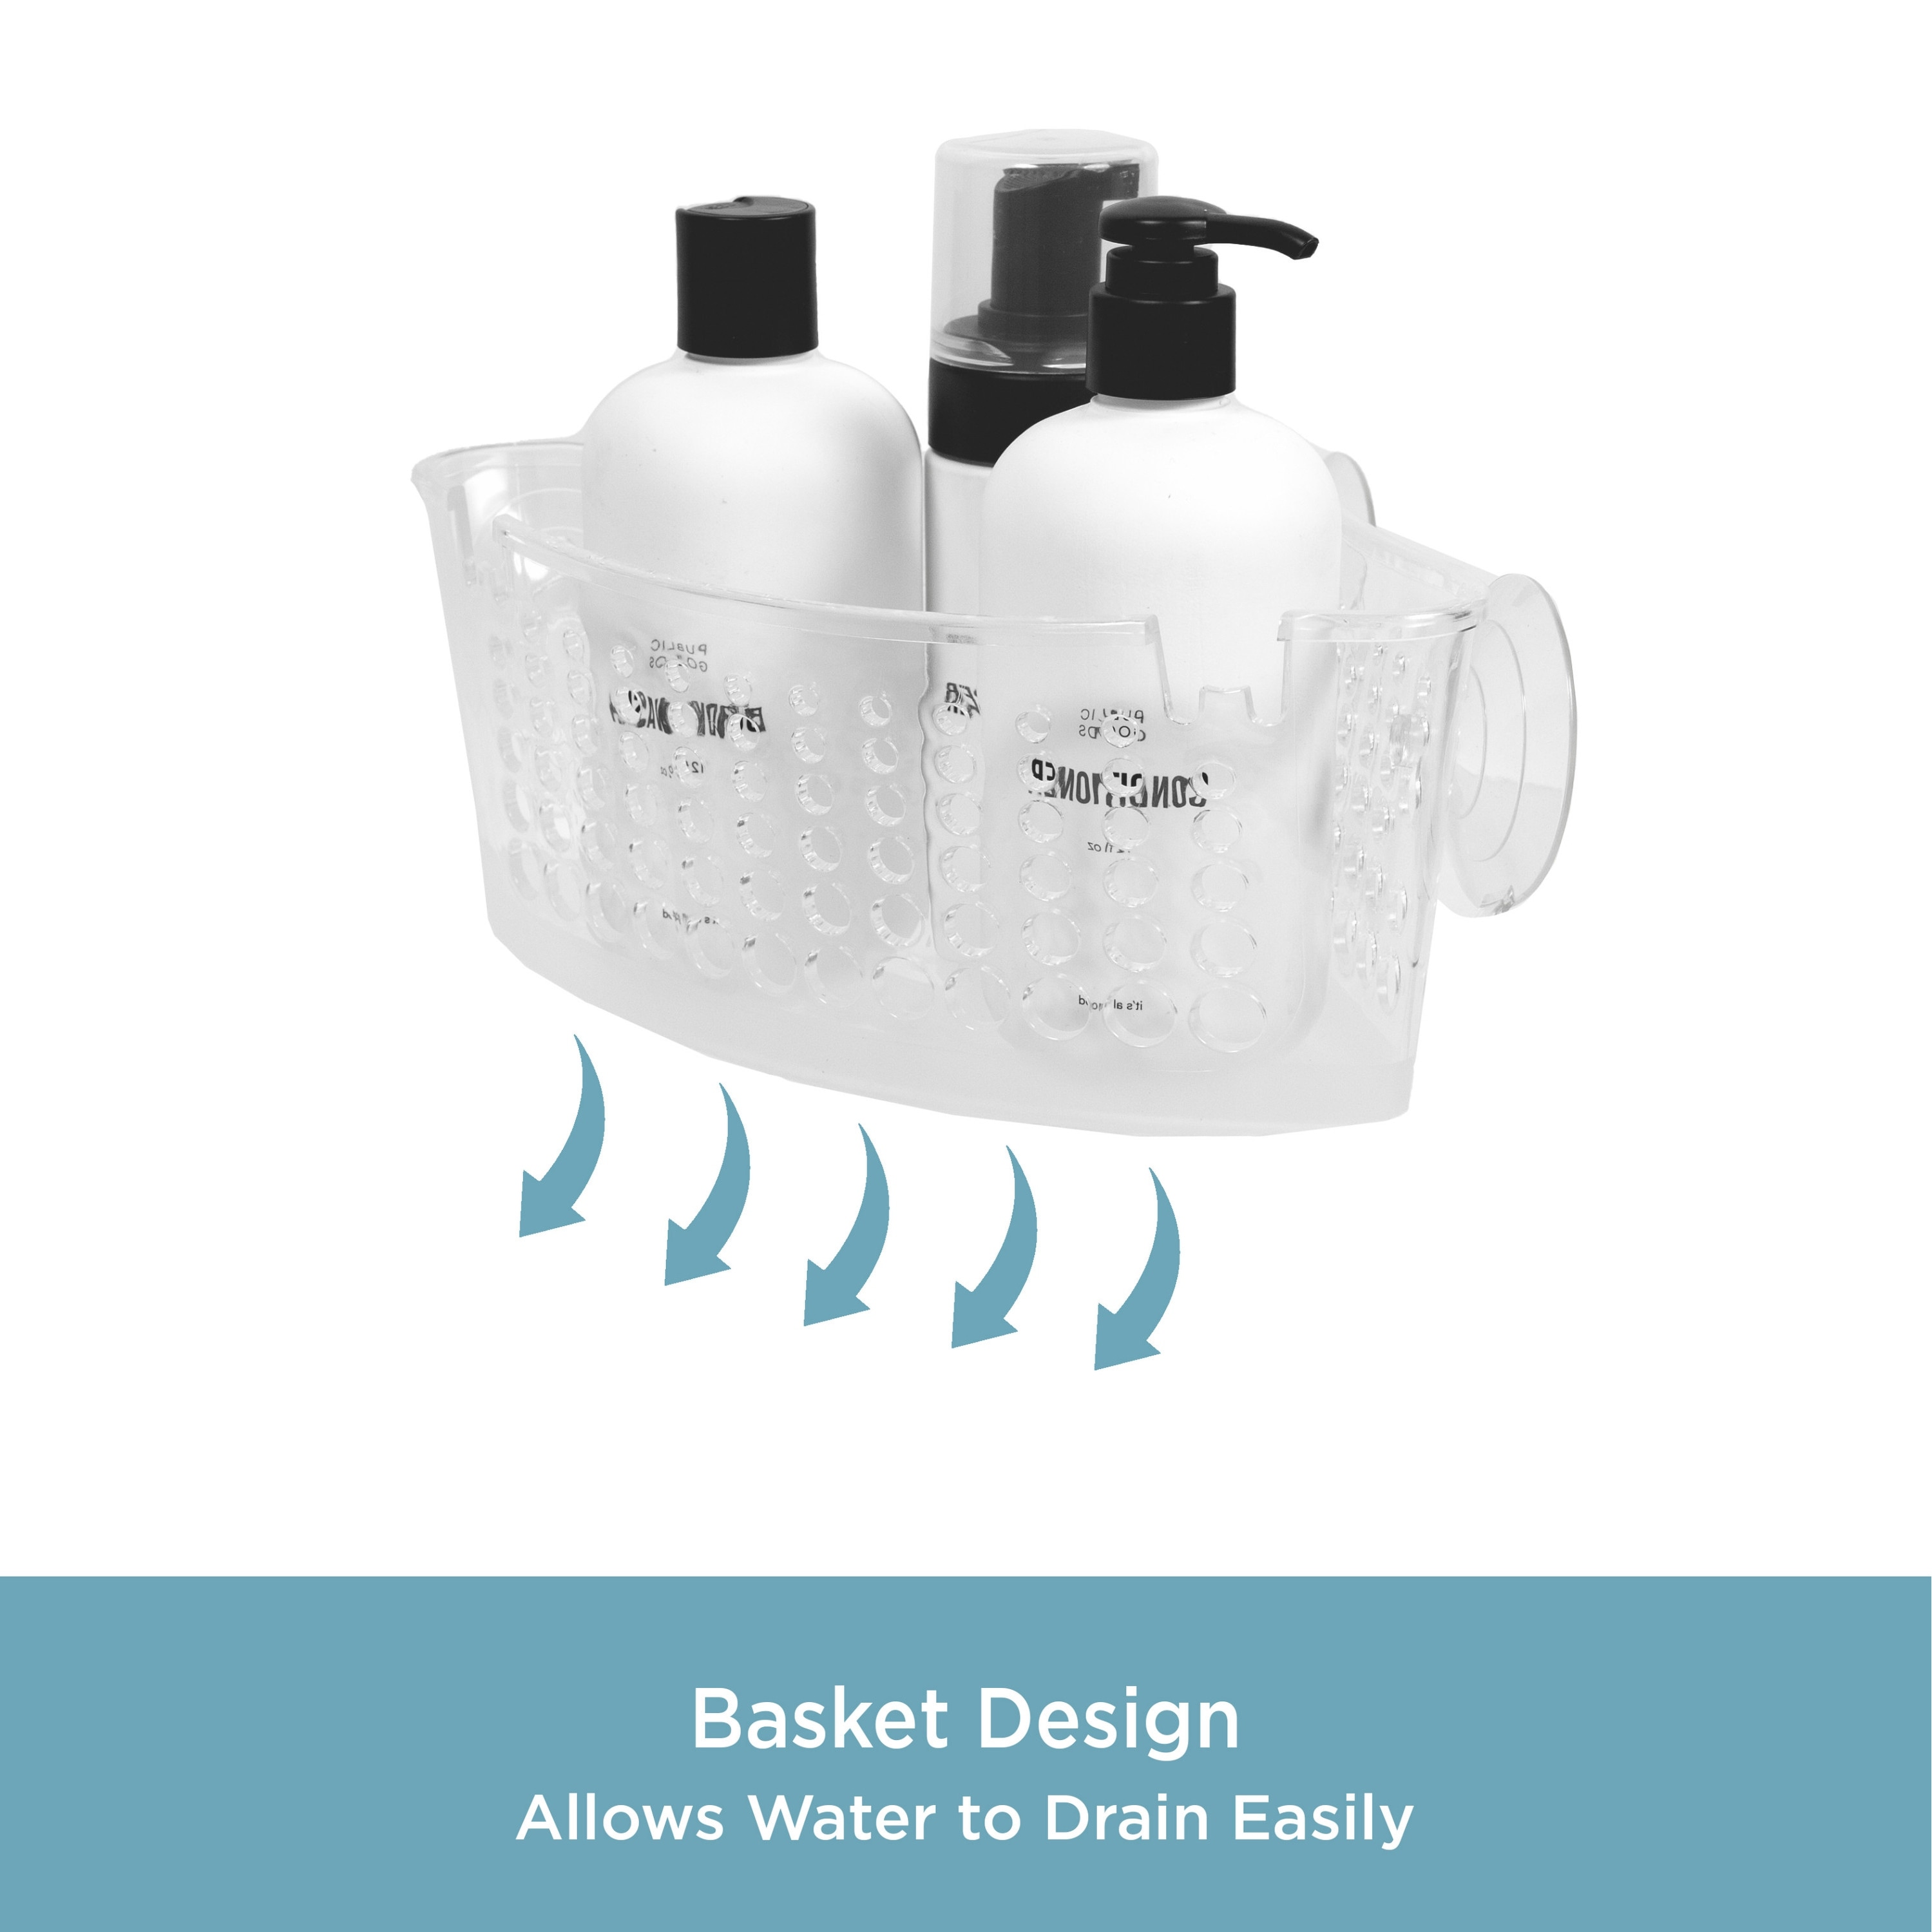 https://ak1.ostkcdn.com/images/products/is/images/direct/29a11237cb5d575d63a3773fba8b9005a41ceced/Kenney-Suction-Cup-Corner-Basket-Shower-Caddy.jpg